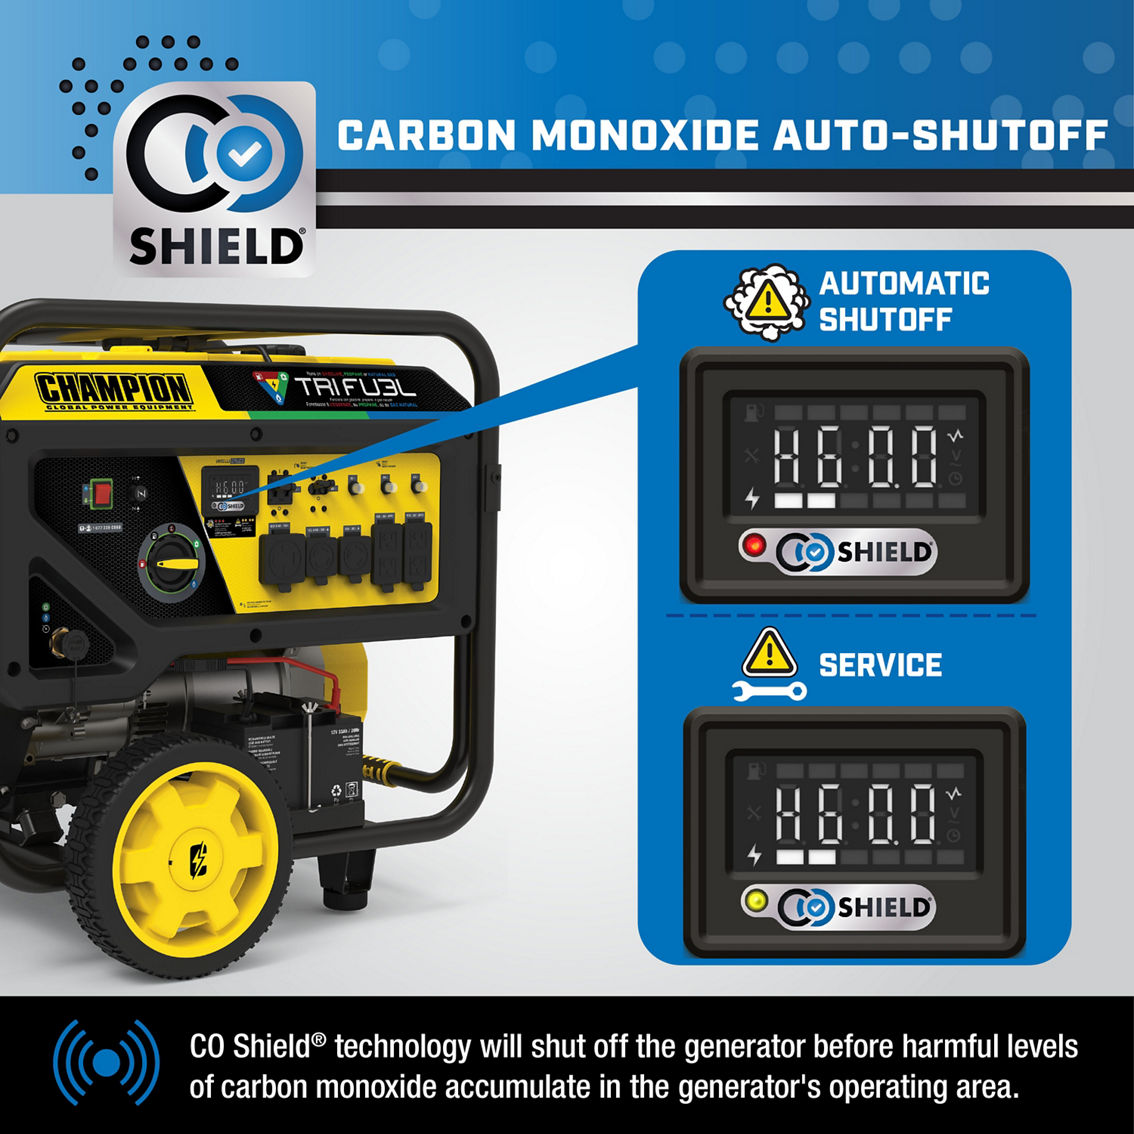 Champion 12,000W Tri Fuel Portable Generator with Electric Start and CO Shield - Image 6 of 10